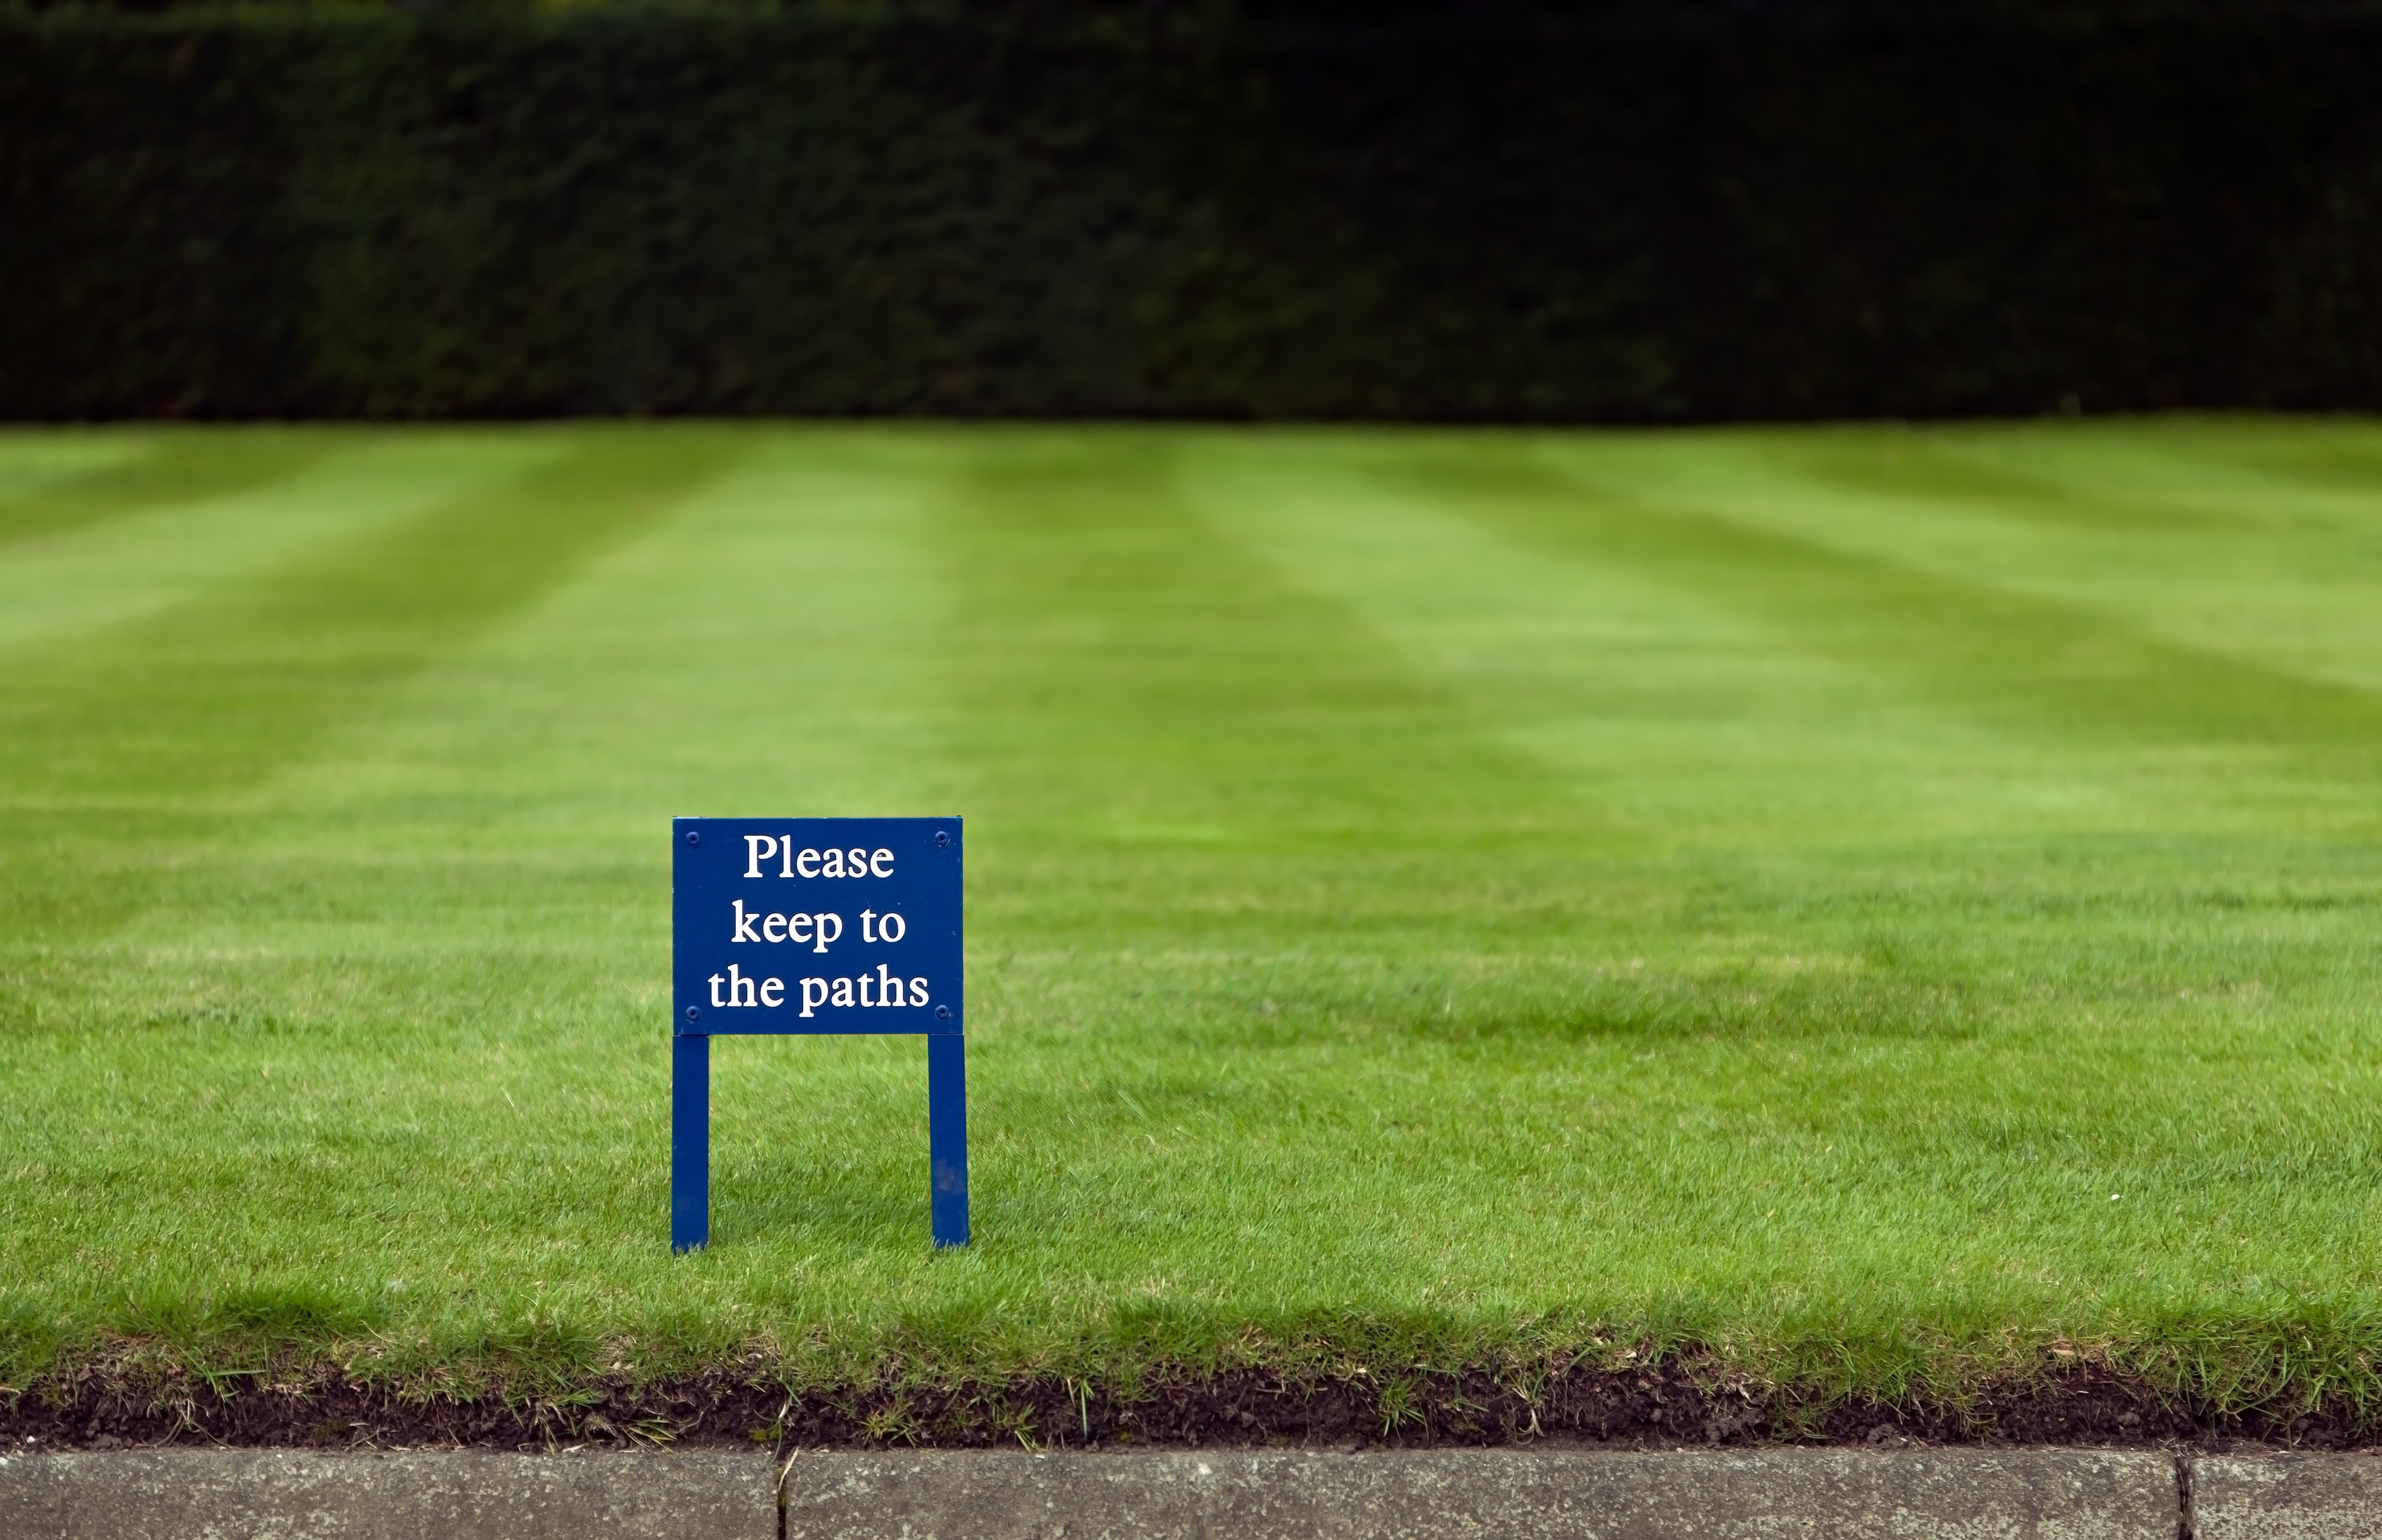 please keep to the paths signboard on grass field